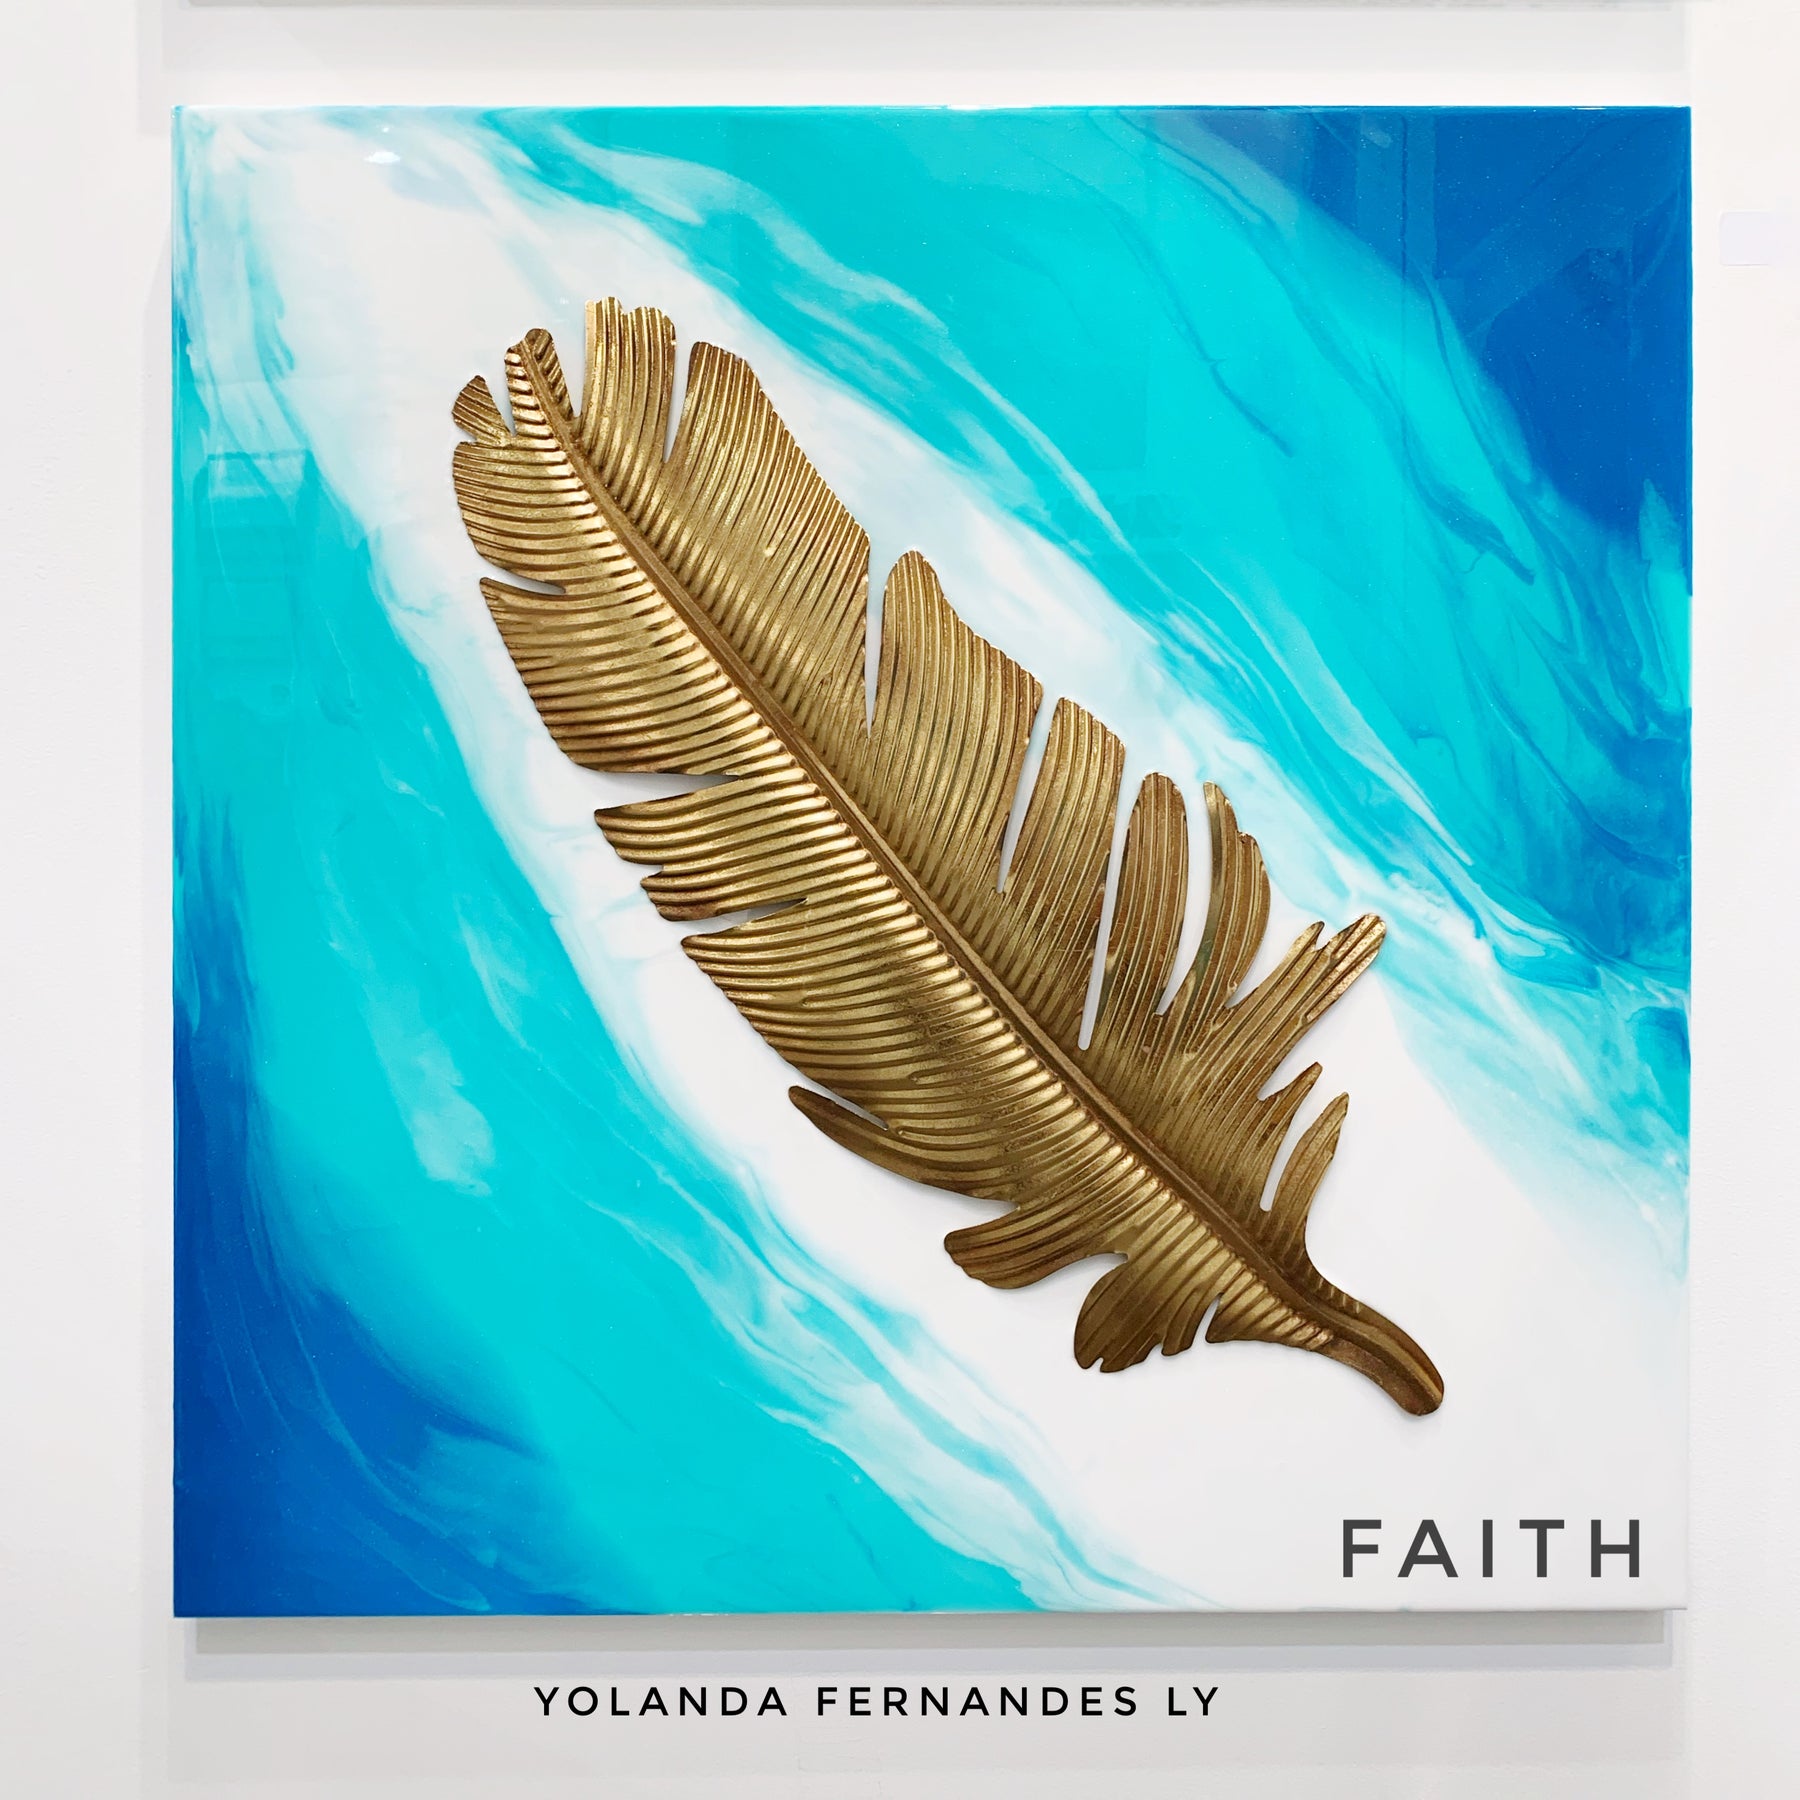 Original Painting - 3 feet by 3 feet - "Faith" - Resin painting with Brass feather accent